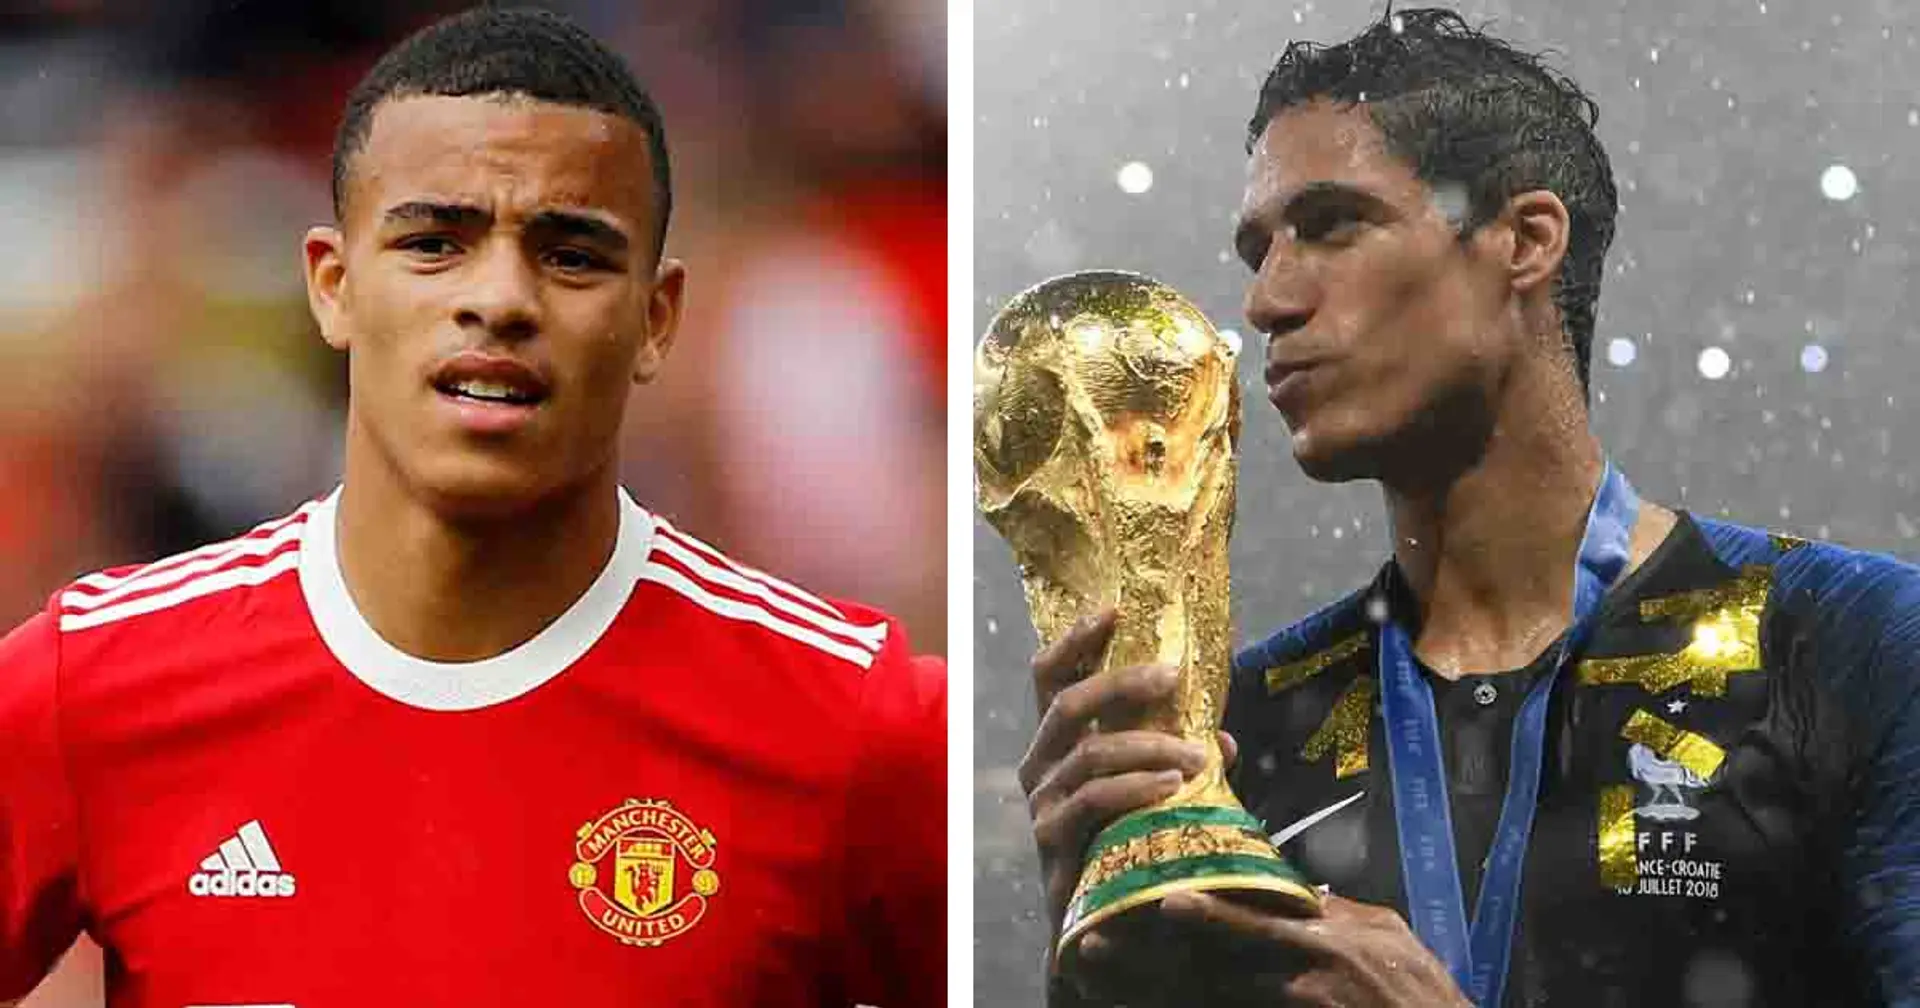 Varane retires from international football & 4 more big stories you might've missed